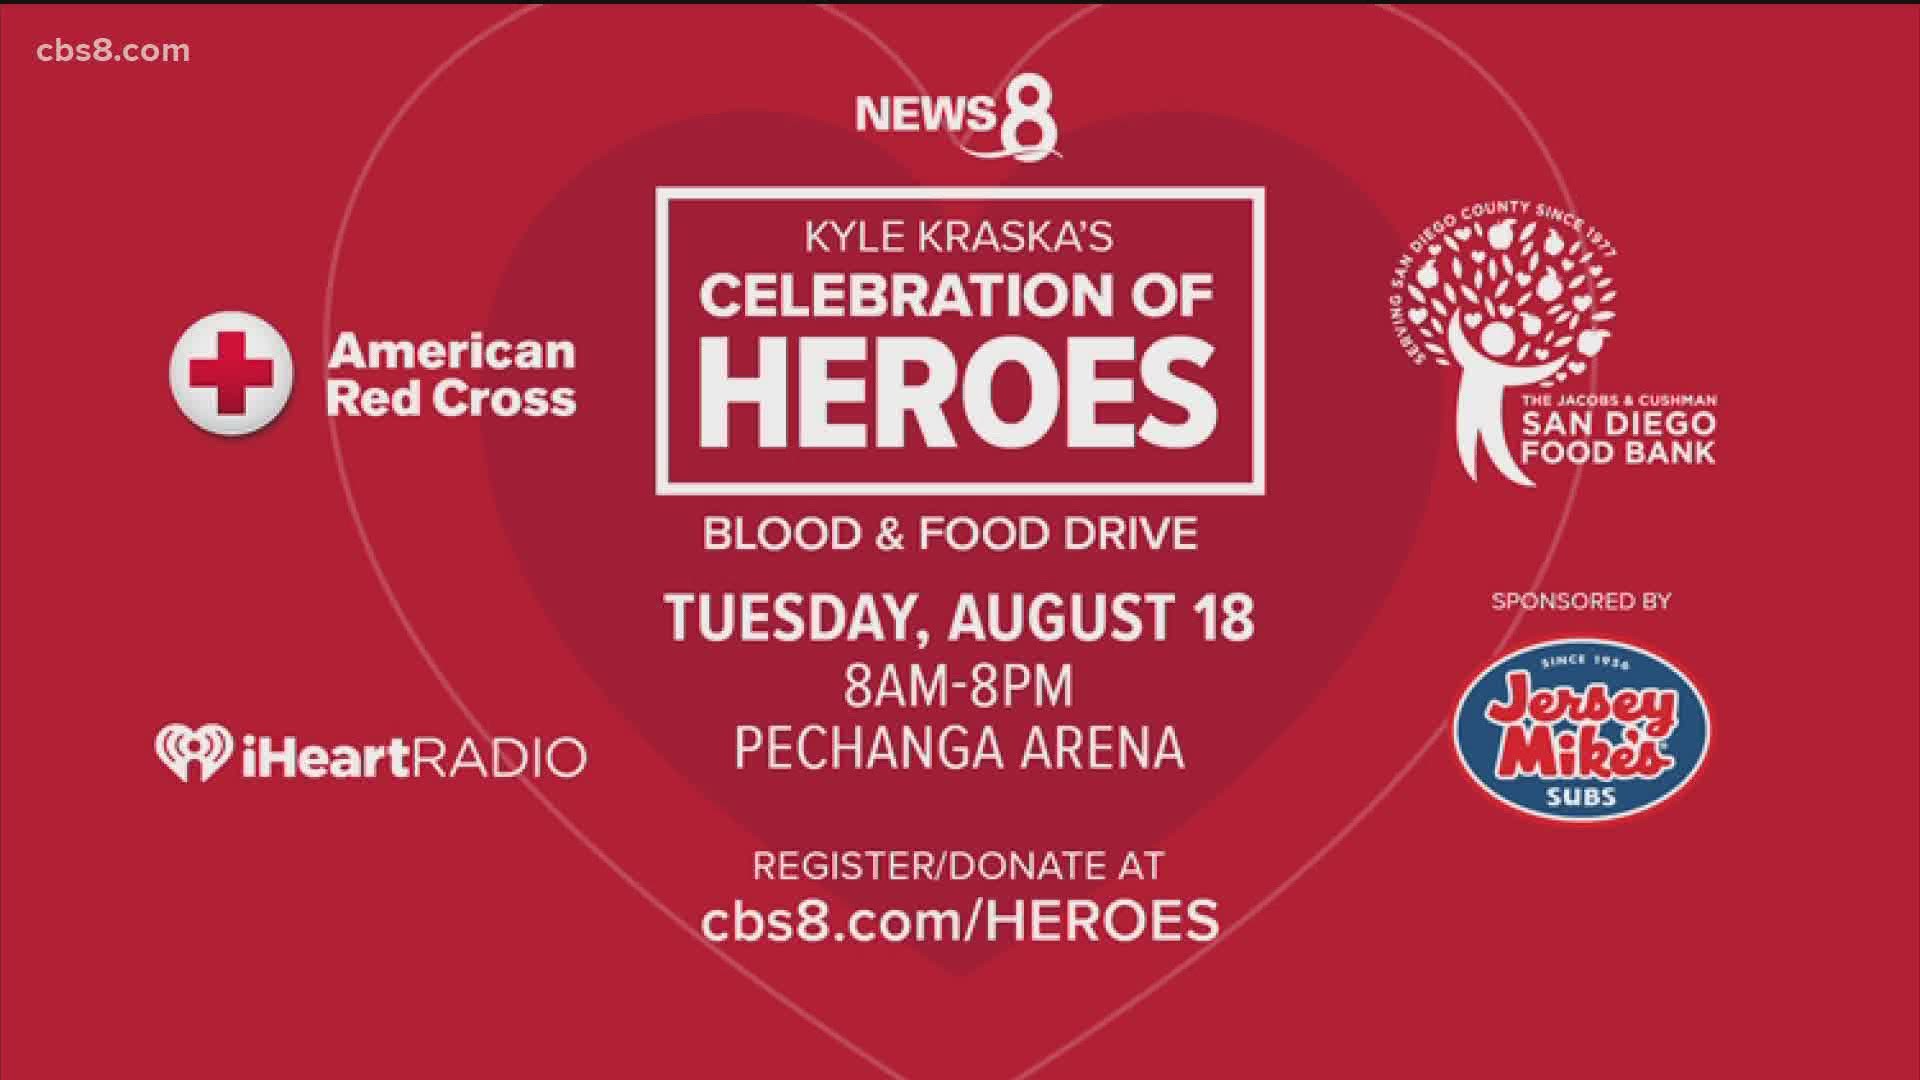 Join Kyle Kraska and News 8 for our day of giving to support The American Red Cross and Jacobs & Cushman San Diego Food Bank.